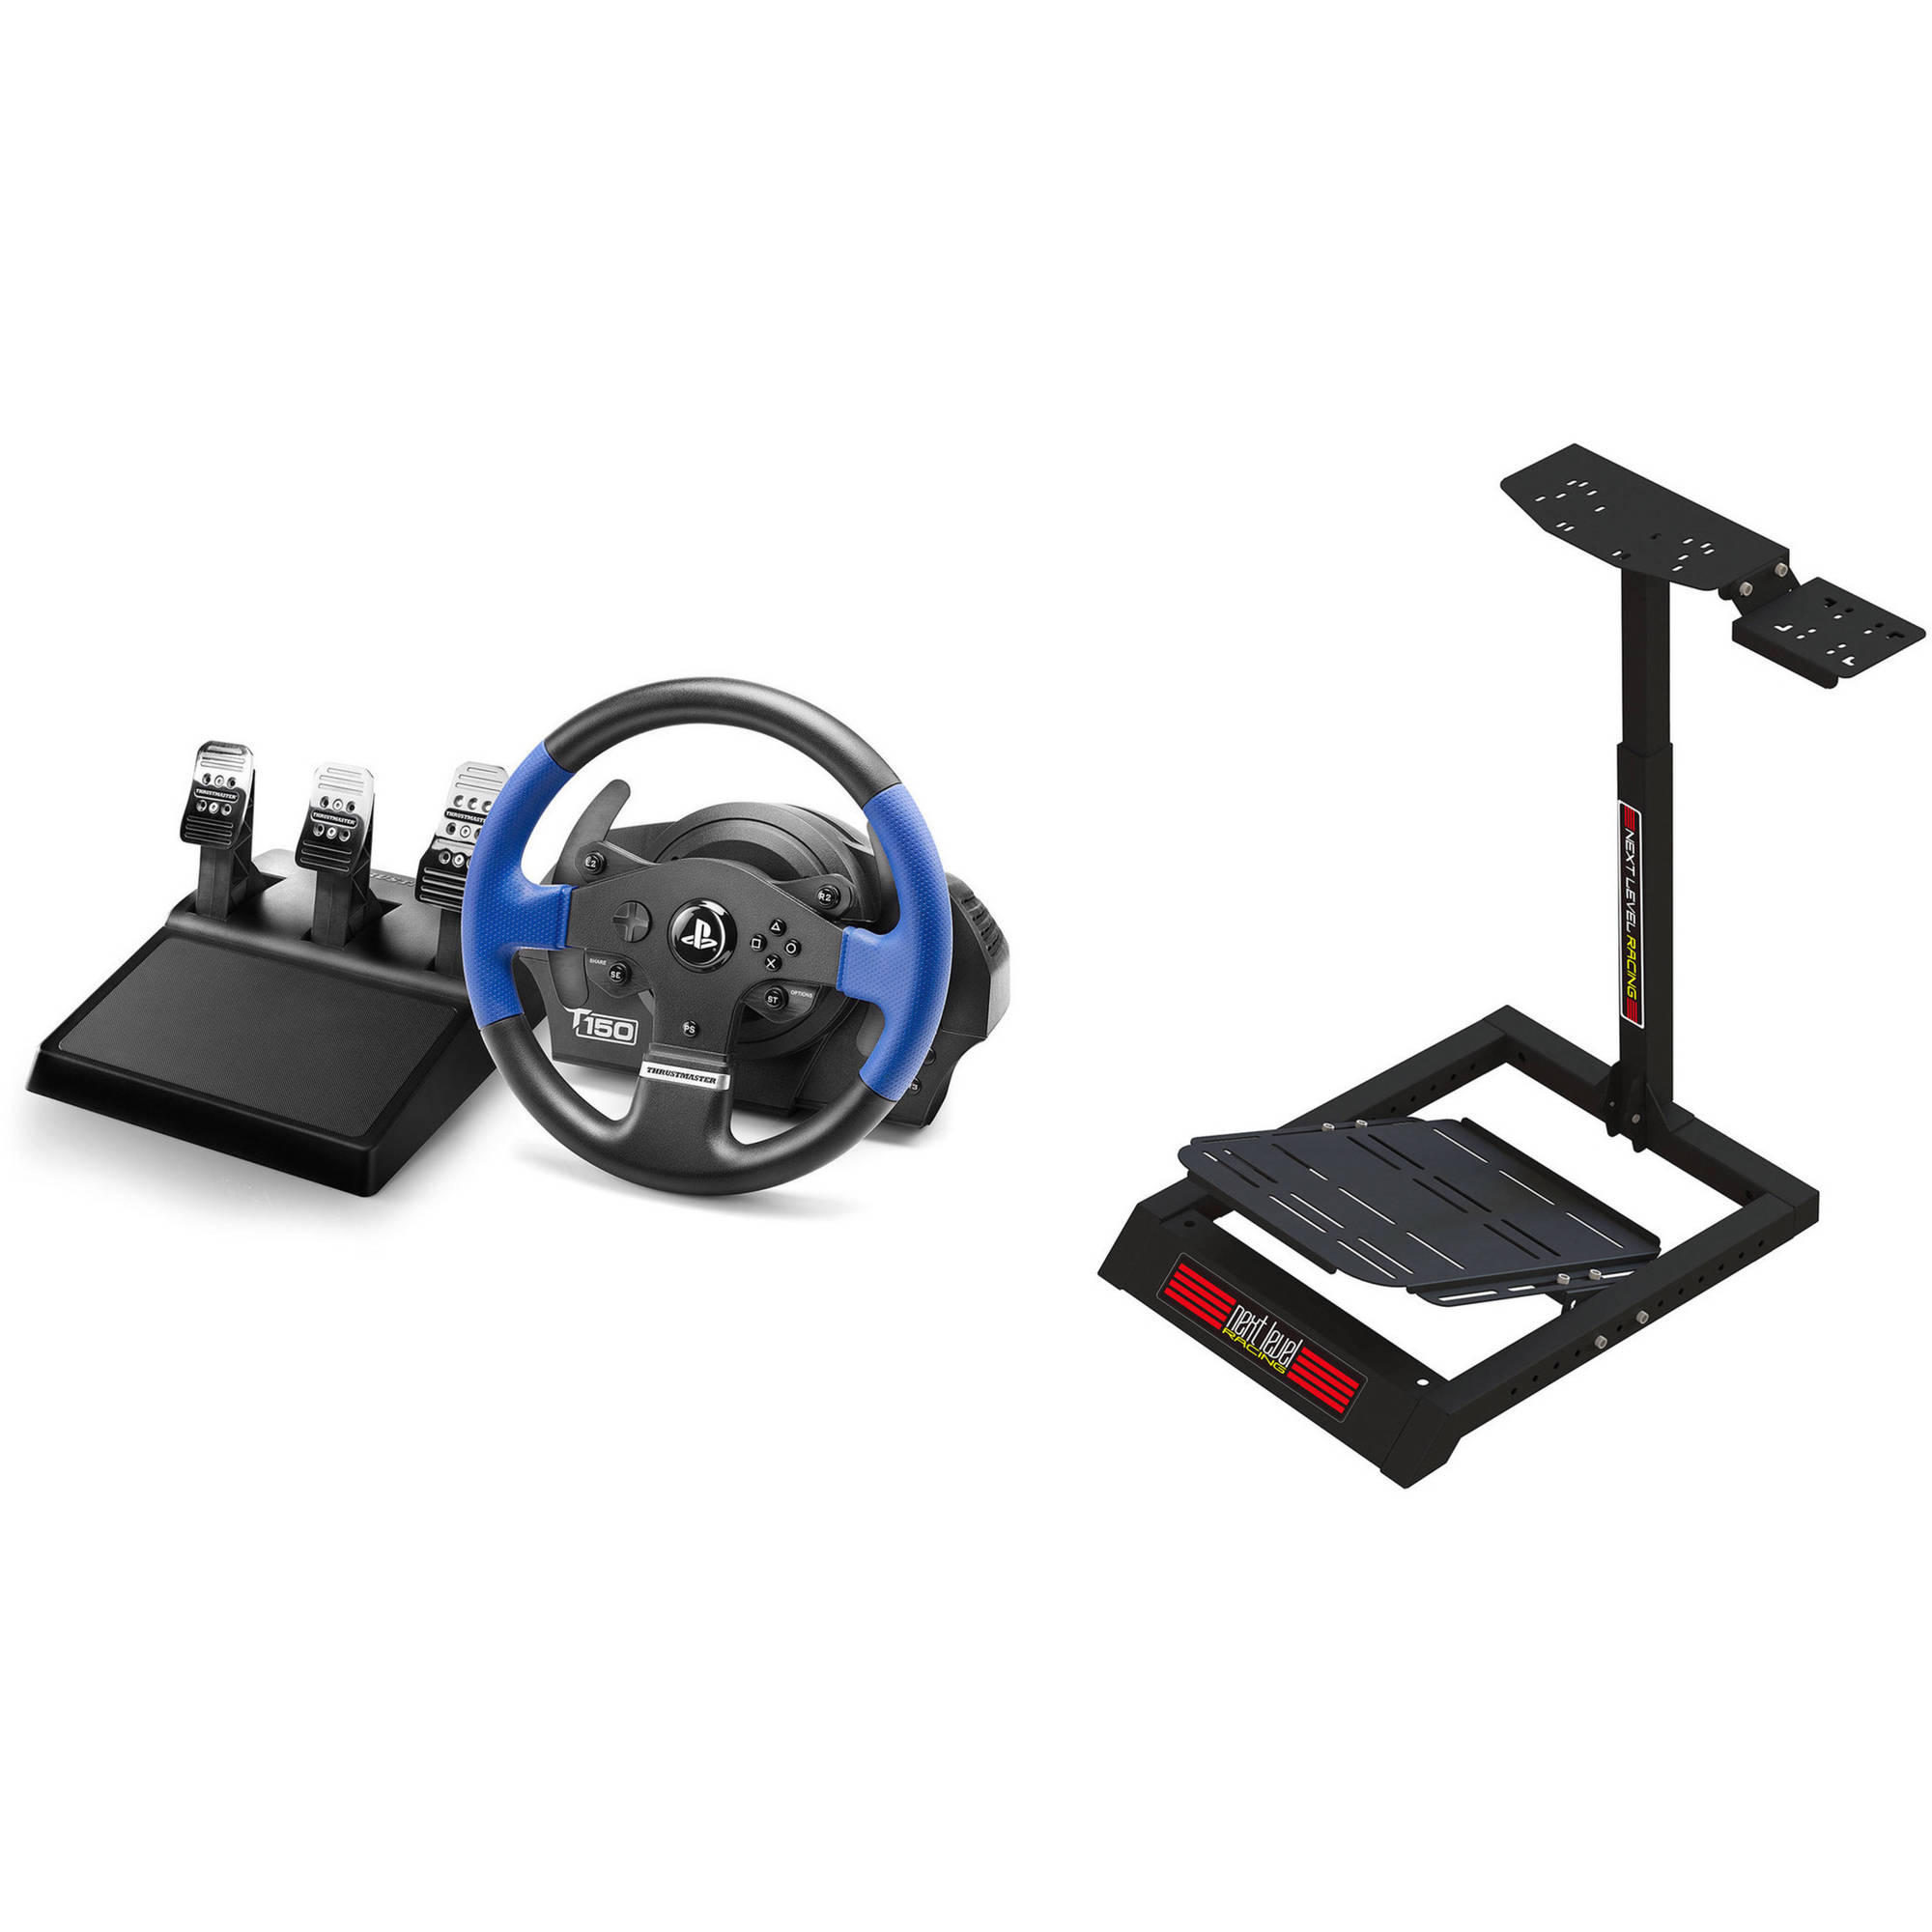 Thrustmaster t150 pro. Thrustmaster t150 Pro Force feedback. T150 Thrustmaster Pro комплектация. Thrustmaster t150 Pro комплект. Thrustmaster t500rs.